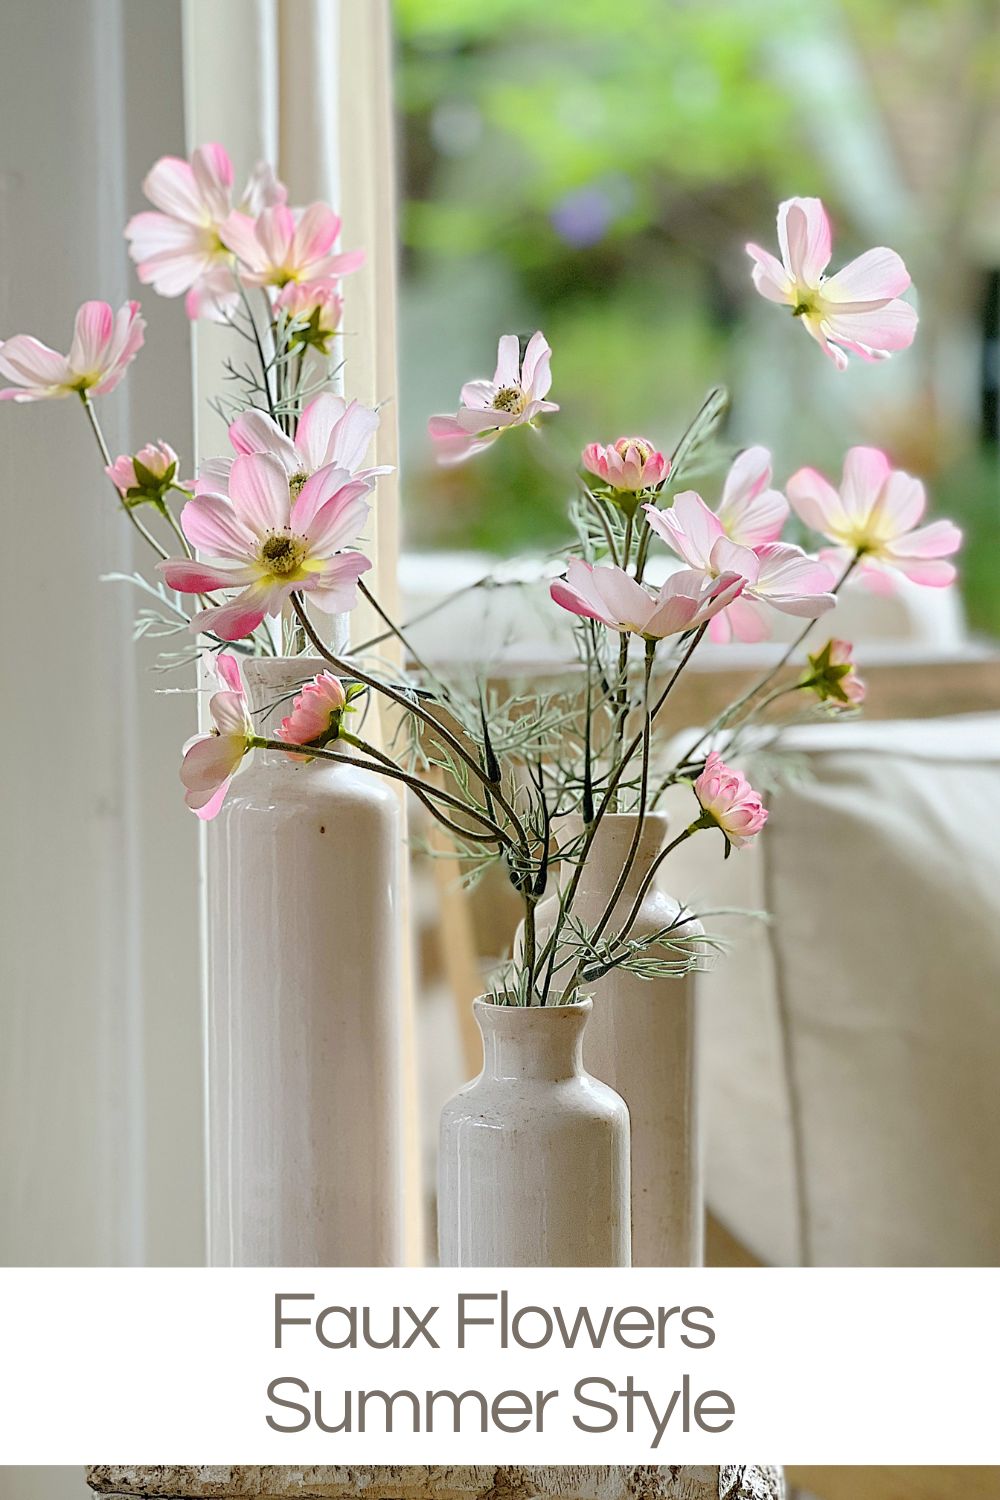 Faux flowers are perfect for summertime arrangements when the temperatures are high and fresh flowers wilt quickly. 